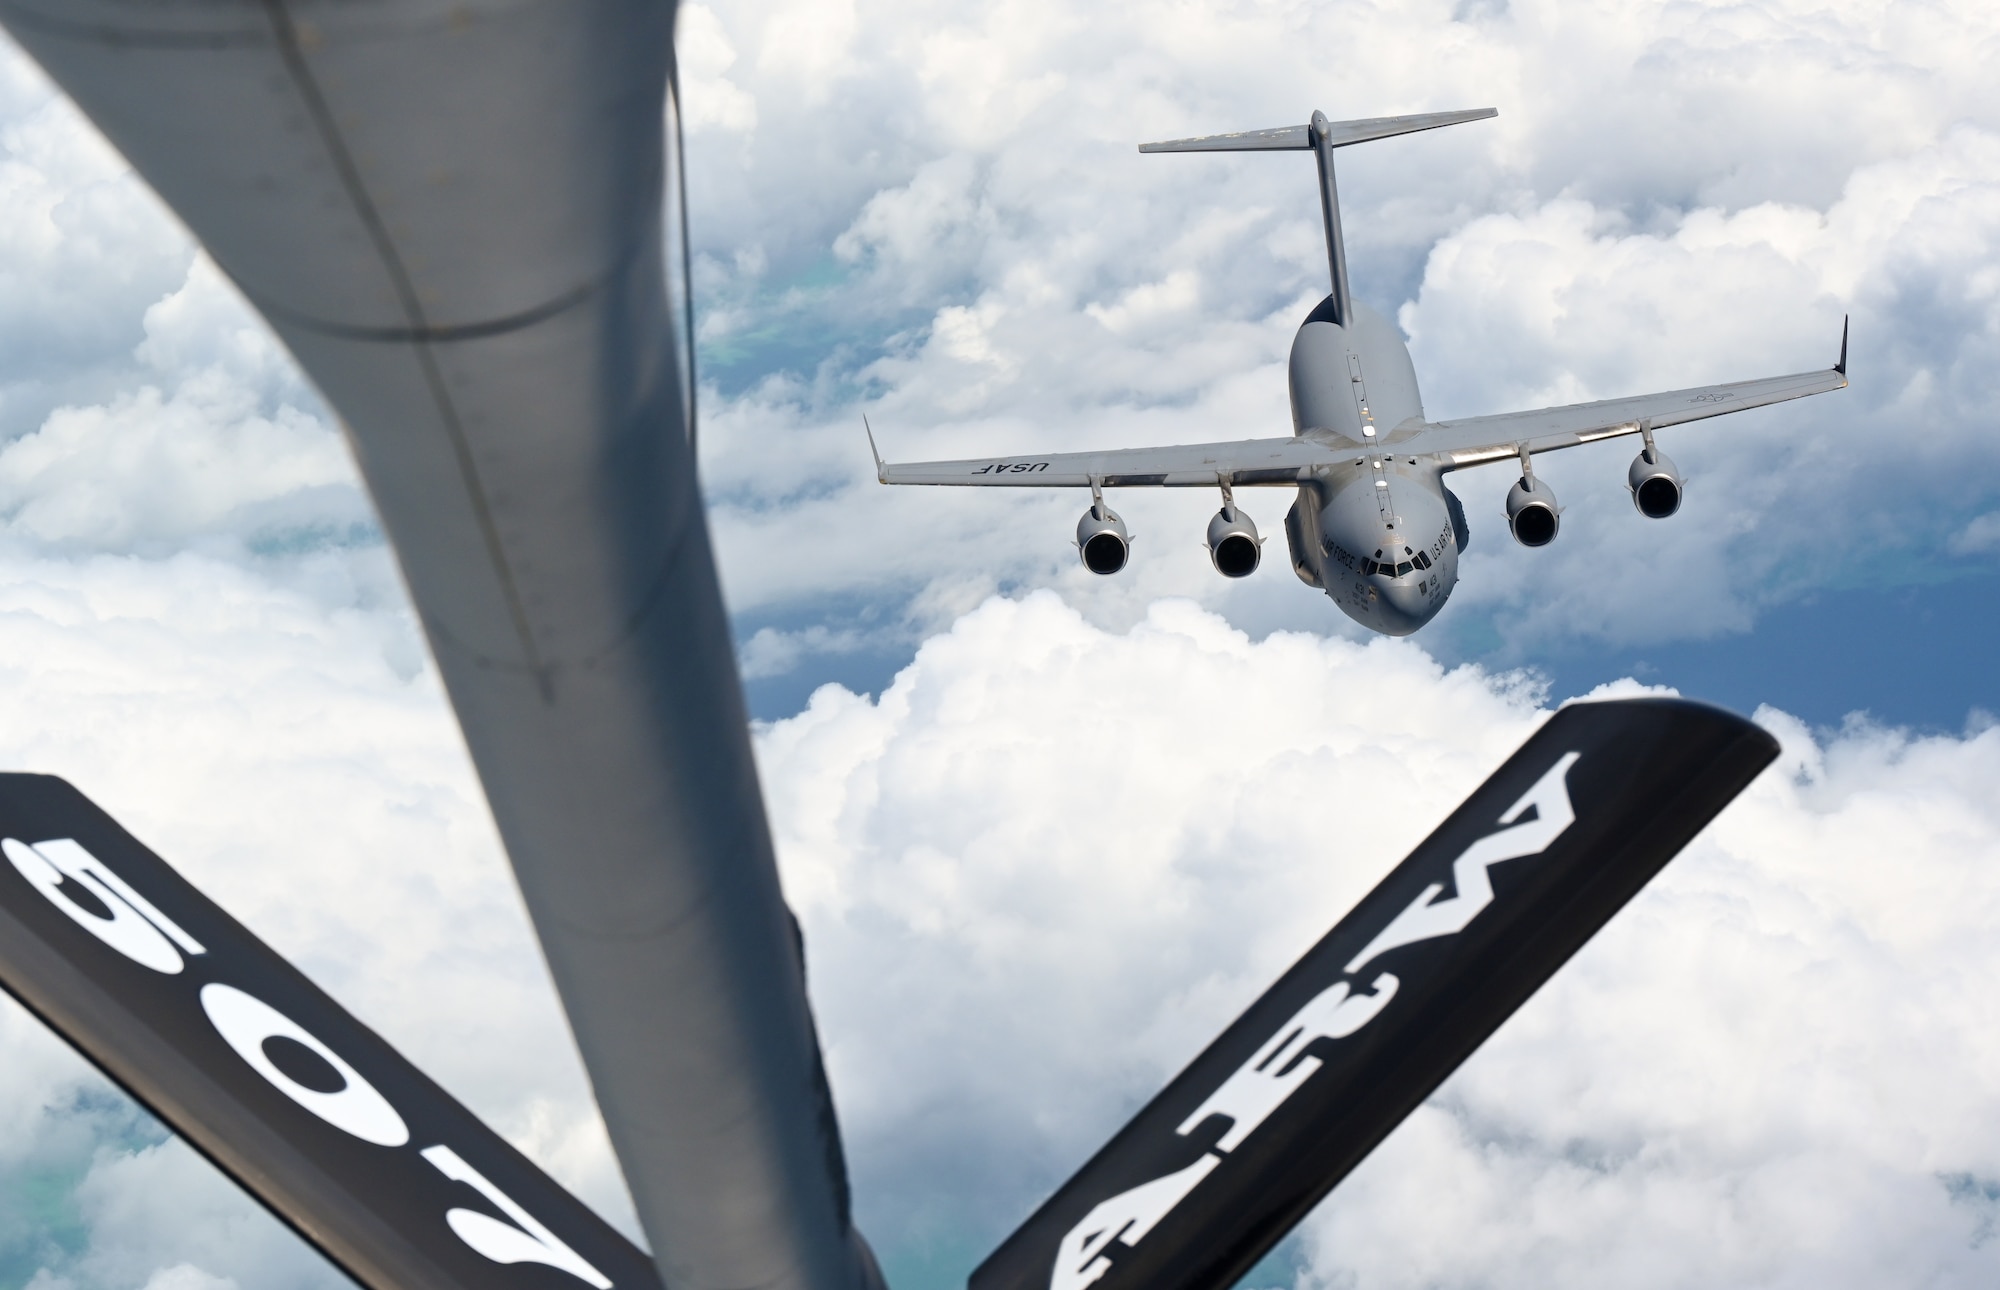 A C-17 Globemaster assigned to the 305th Air Mobility Wing, Joint Base McGuire-Dix-Lakehurst, New Jersey, refuels with a KC-135 Stratotanker from the 465th Air Refueling Squadron, Tinker Air Force Base, Oklahoma, over the Atlantic Ocean, June 9, 2022. (U.S. Air Force photo by 2nd Lt. Mary Begy)